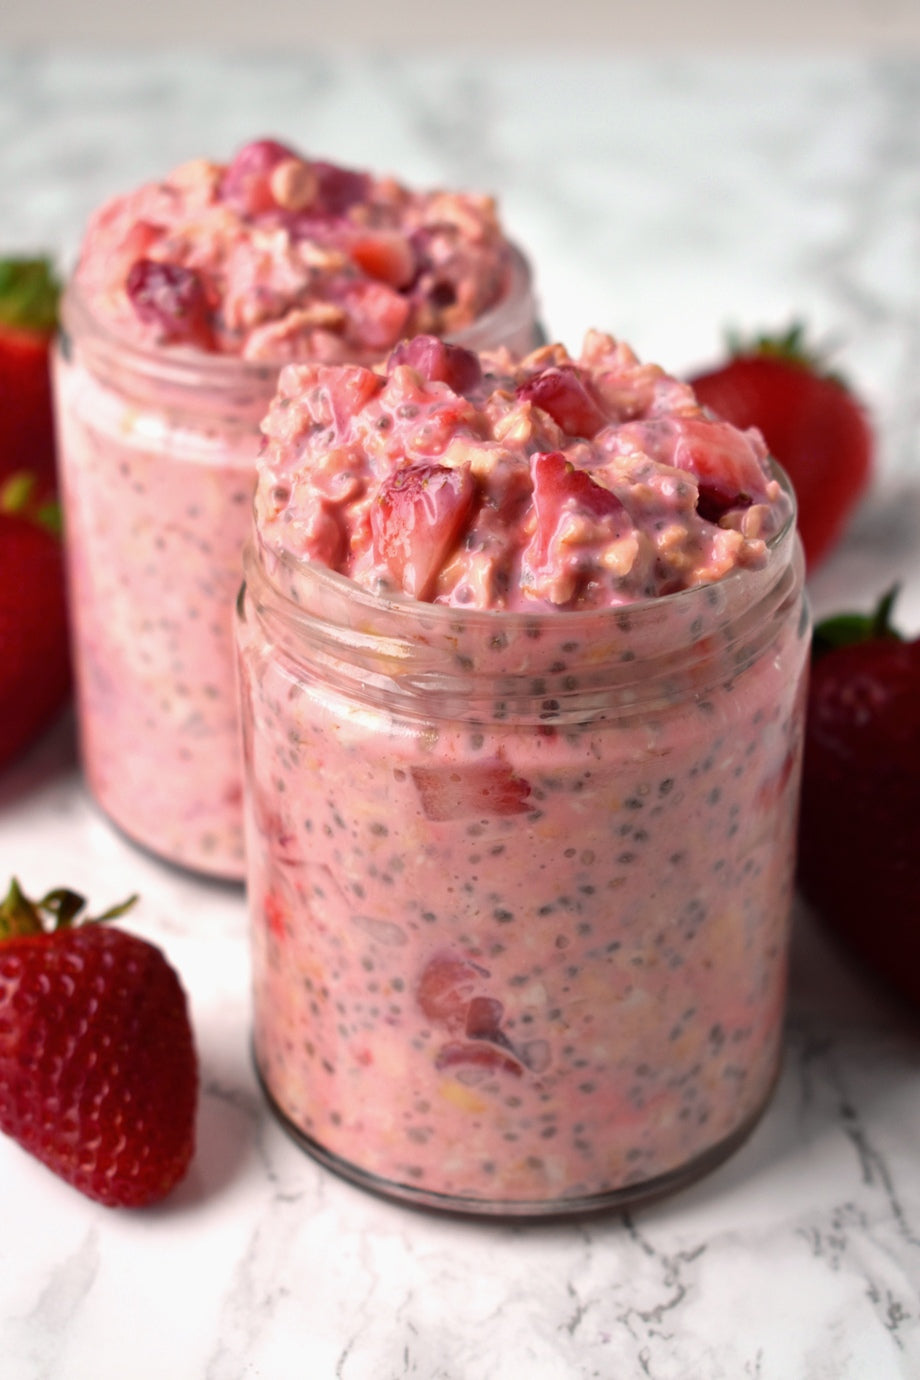 STRAWBERRIES AND CREAM OVERNIGHT OATS